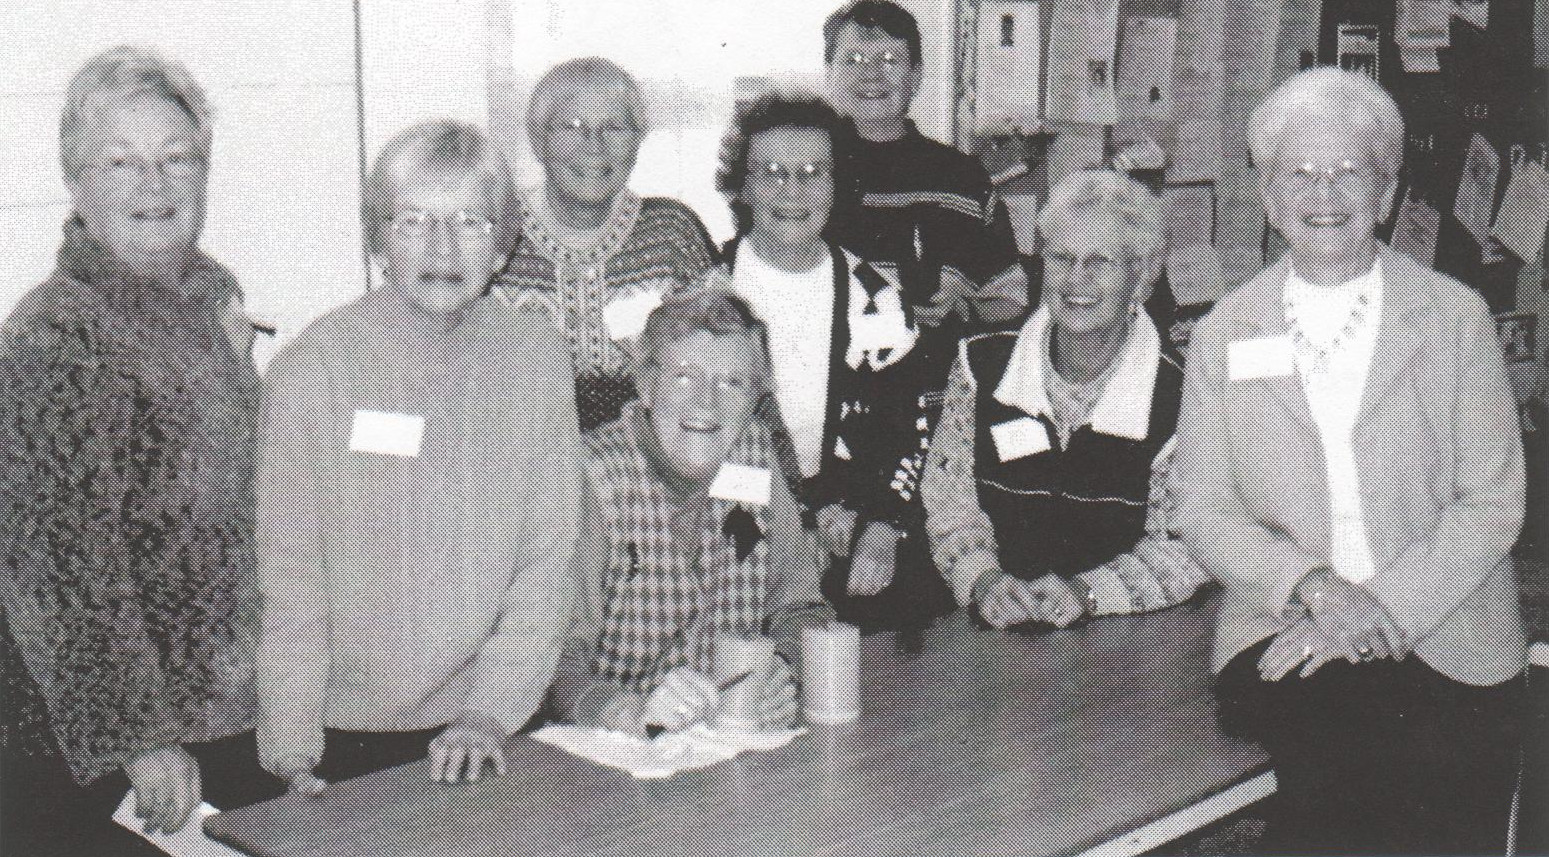 Some indispensable women of All Saints in the Holy Spirit teachers' lounge one Sunday in 2007: Altar Guild members, sidespeople, and those who make the coffee. From left to right, Lynda Alderman, Dot Pellow, Milli Pratt, Joyce Clapperton, Pat Tittemore, Christine Goodman, Shirley Thomas and Robin Harvie.